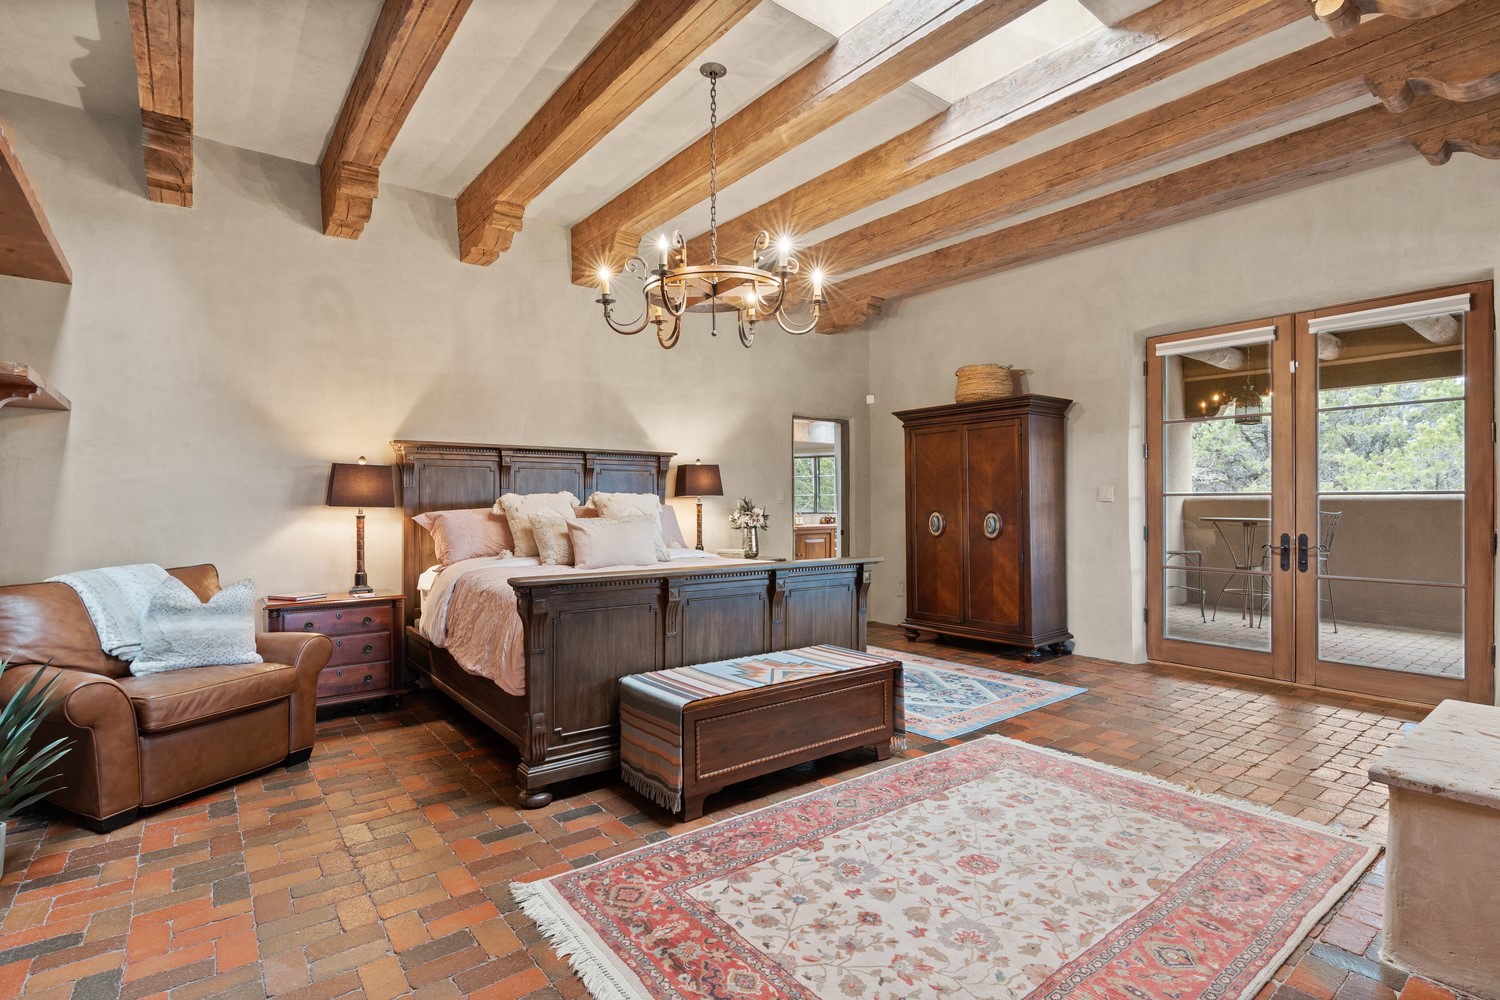 Spacious master bedroom with private patio access